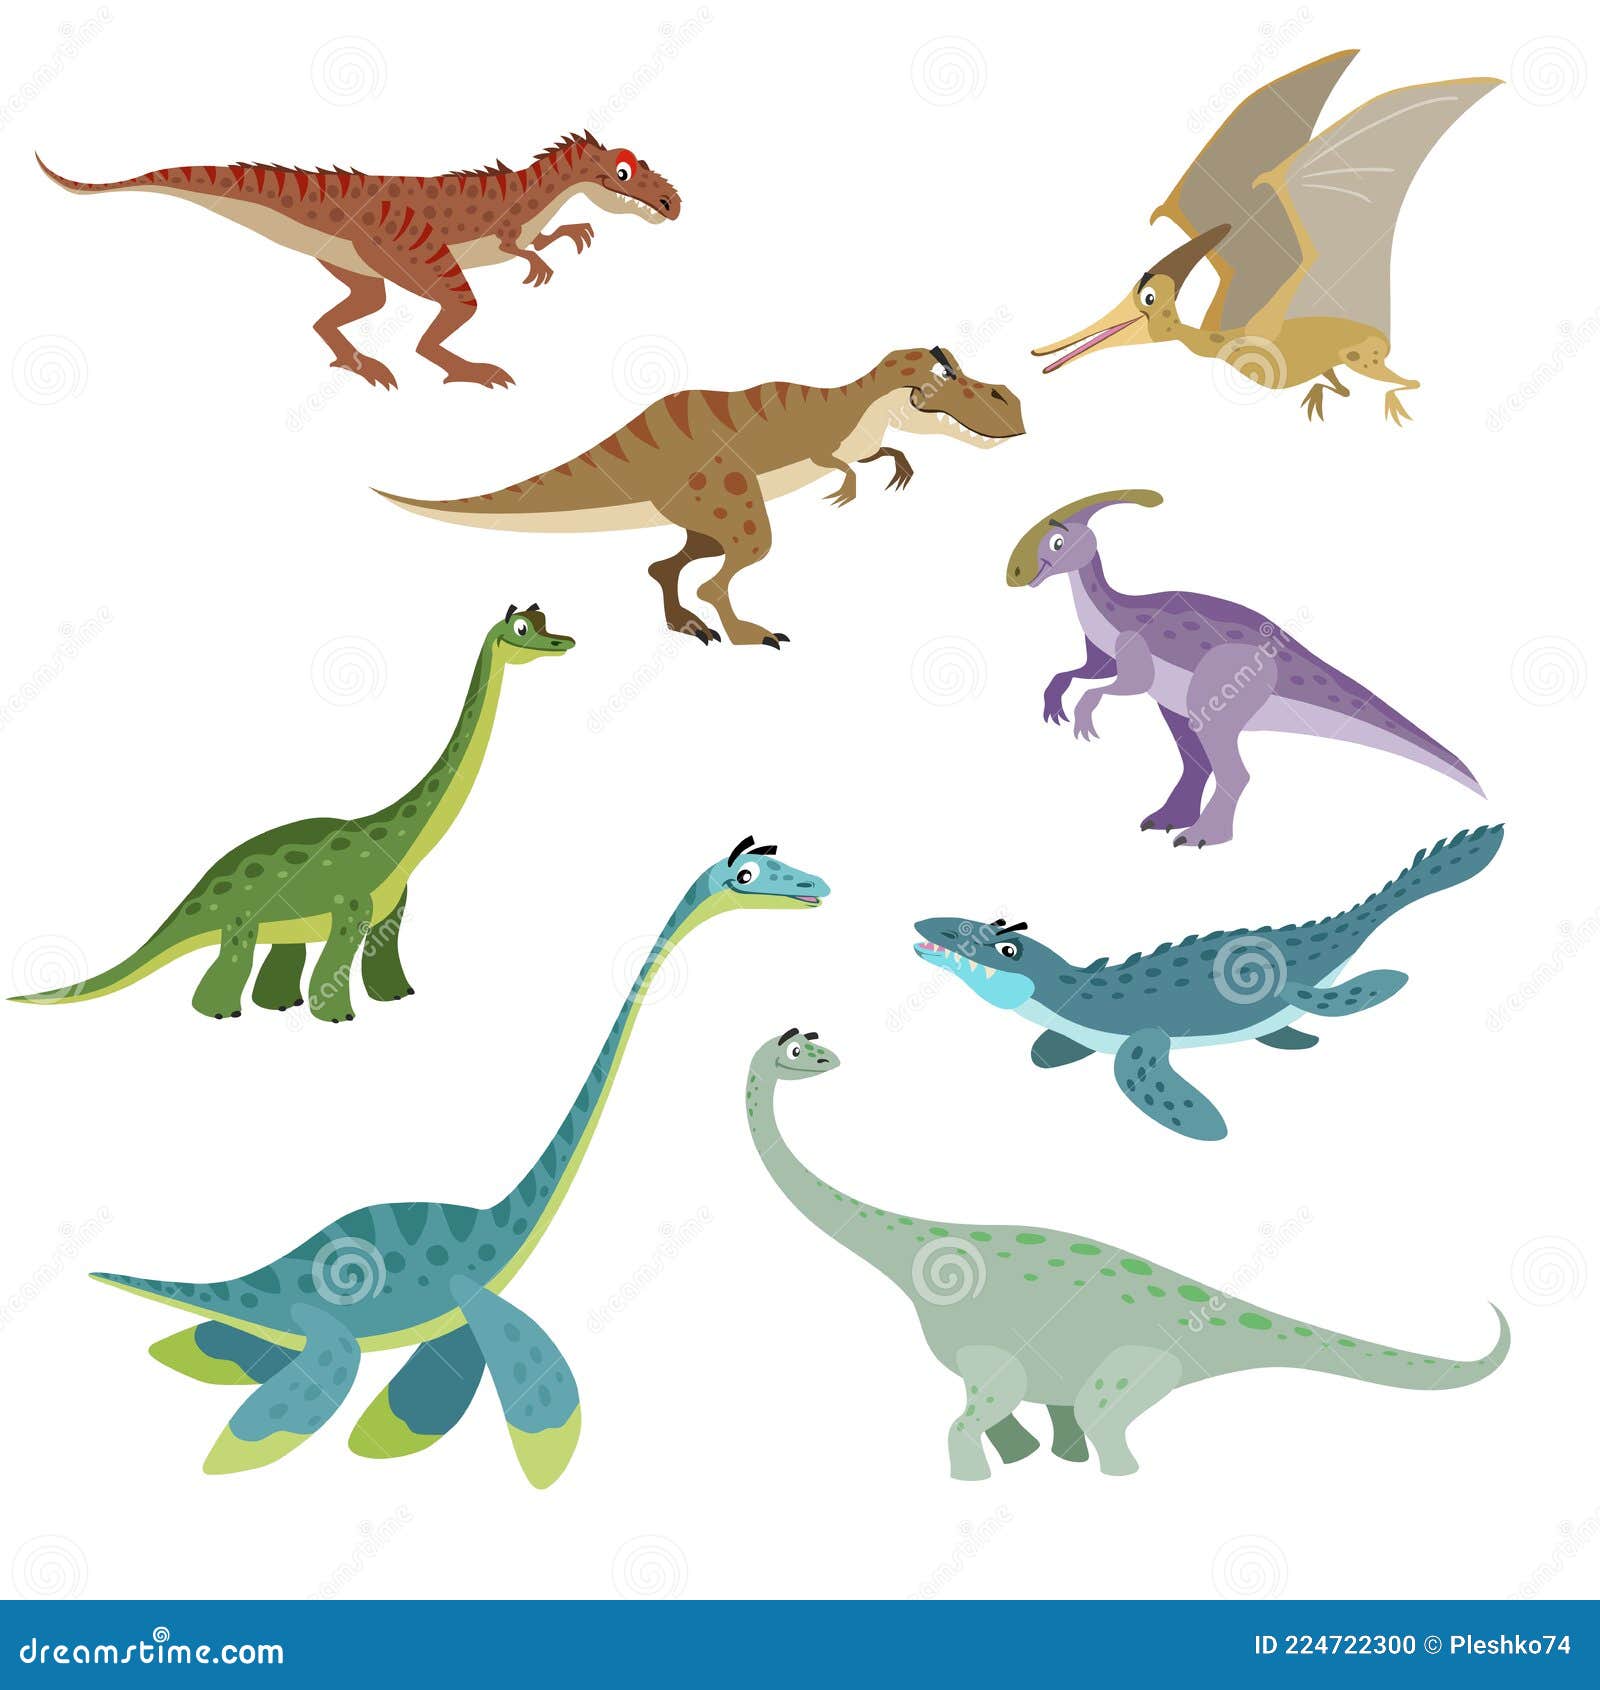 cartoon dinosaurs set. cute dinosaurs collection in flat funny style. predators and herbivores prehistoric wild animals.  il